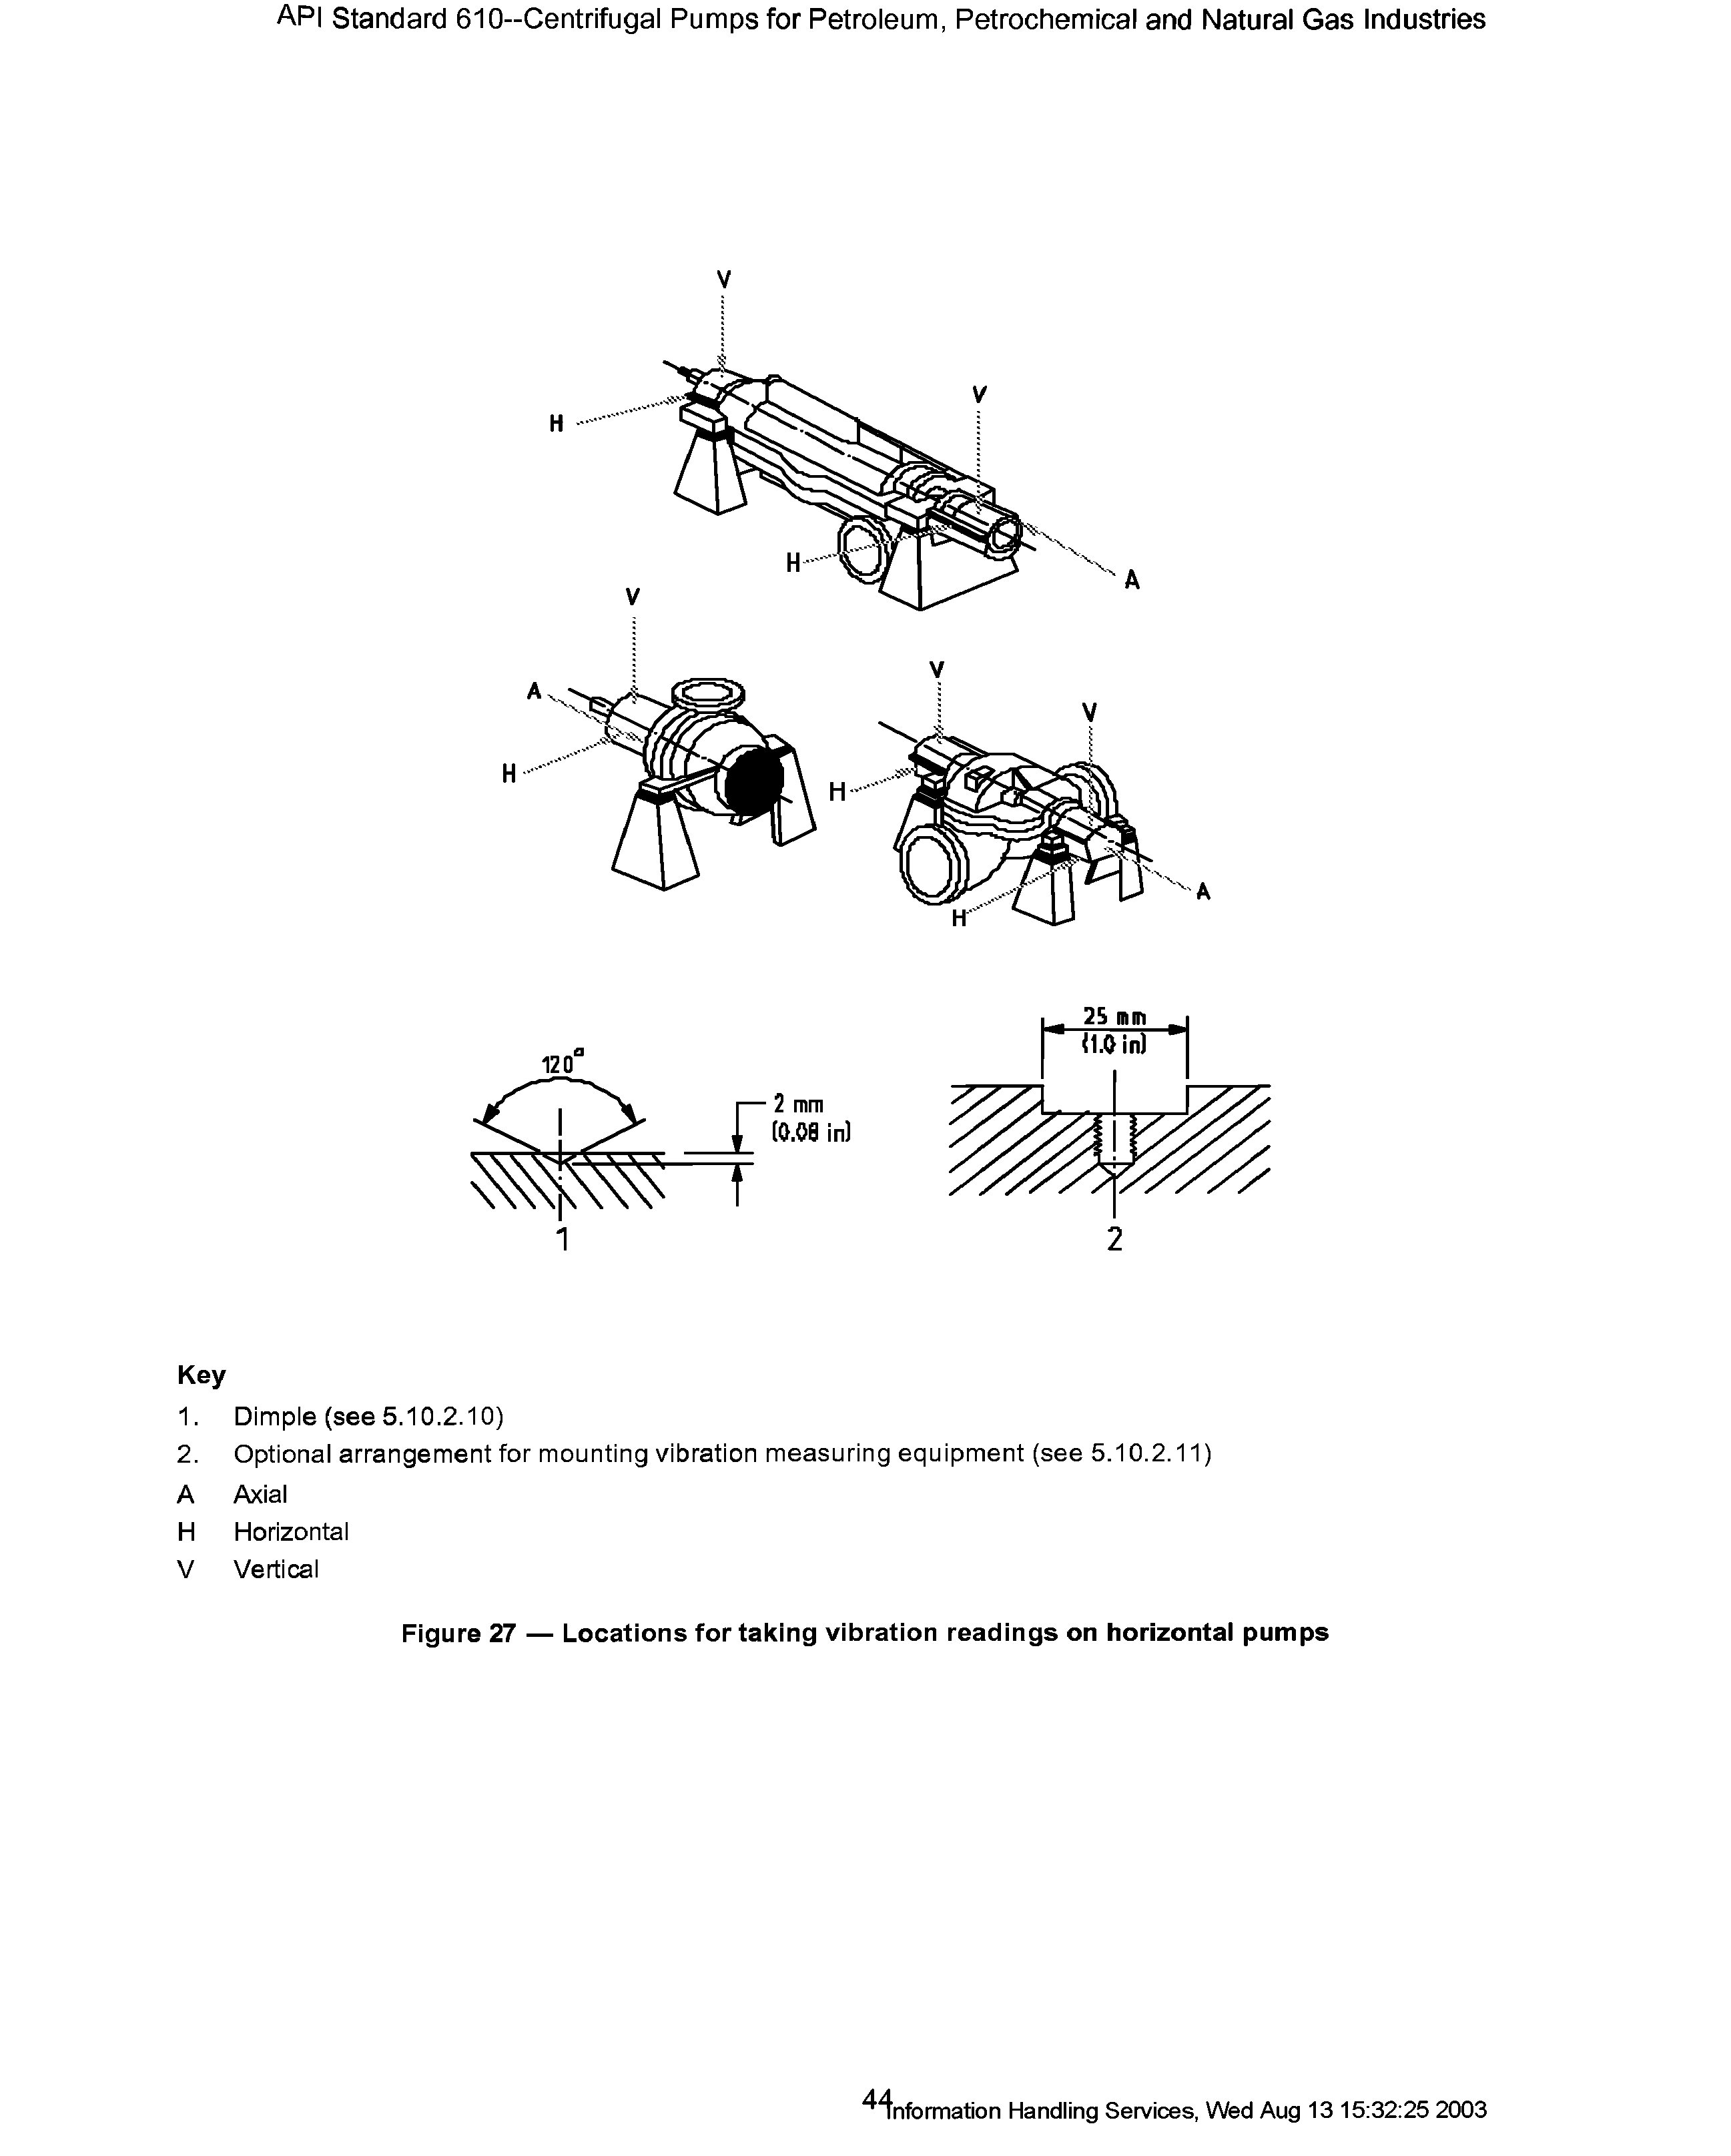 Figure 27 — Locations for taking vibration readings on horizontal pumps...